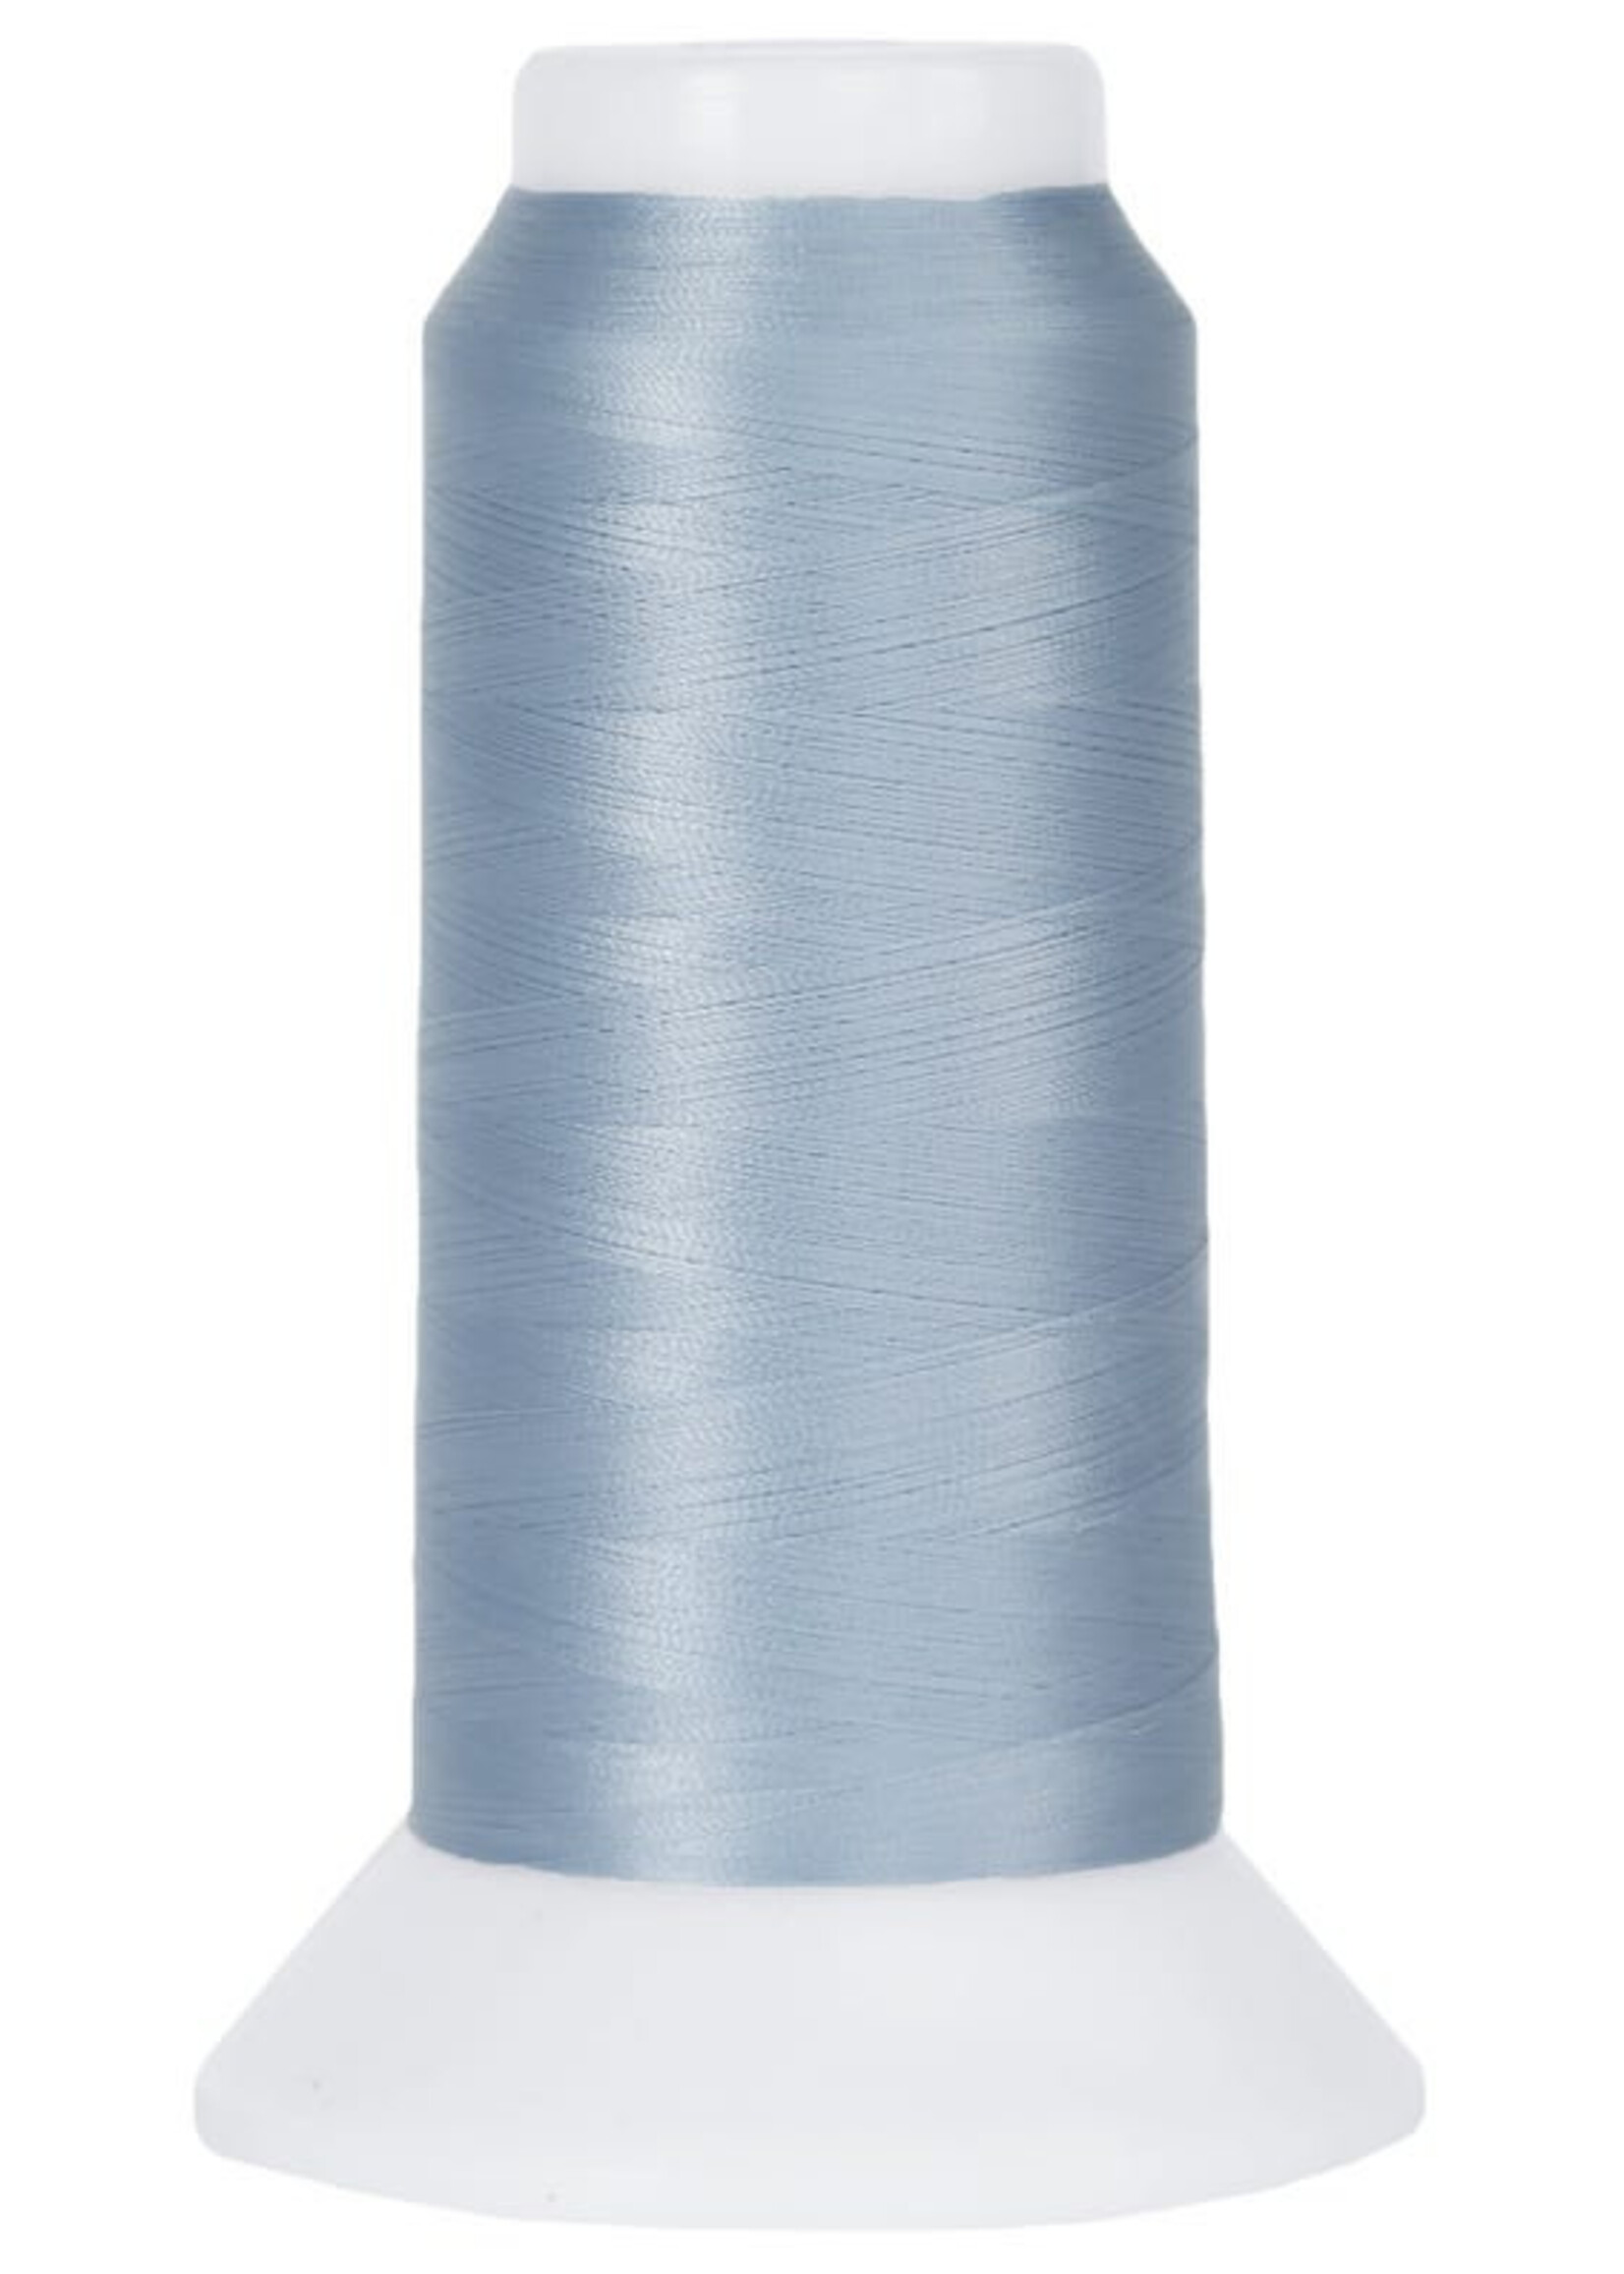 Superior Threads MicroQuilter 3,000 yd cone 100Wt. 7018 Light BlueChampagne